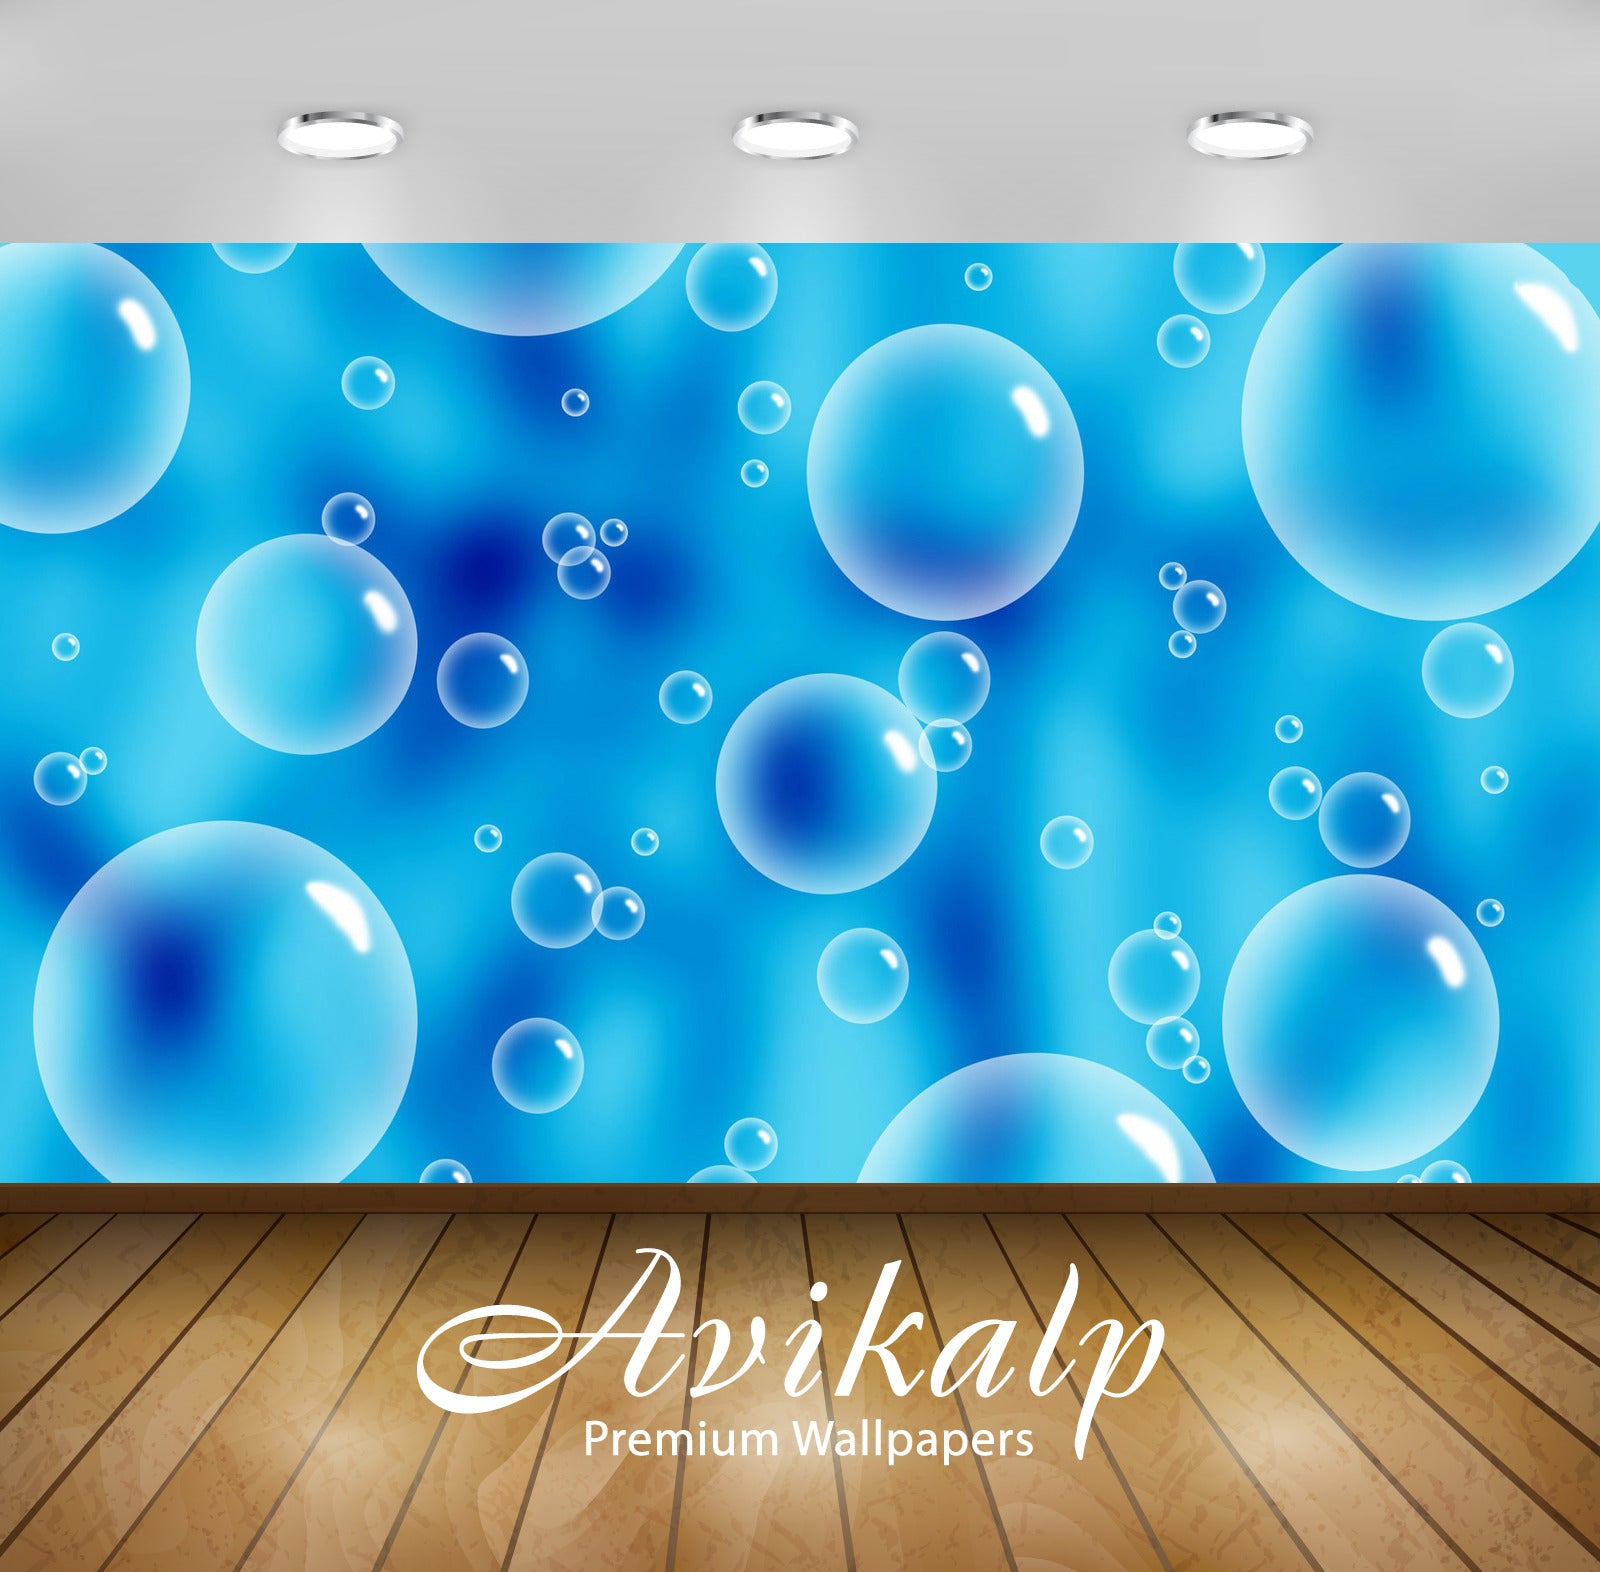 Avikalp Exclusive Awi4101 Bubbles Full HD Wallpapers for Living room, Hall, Kids Room, Kitchen, TV B